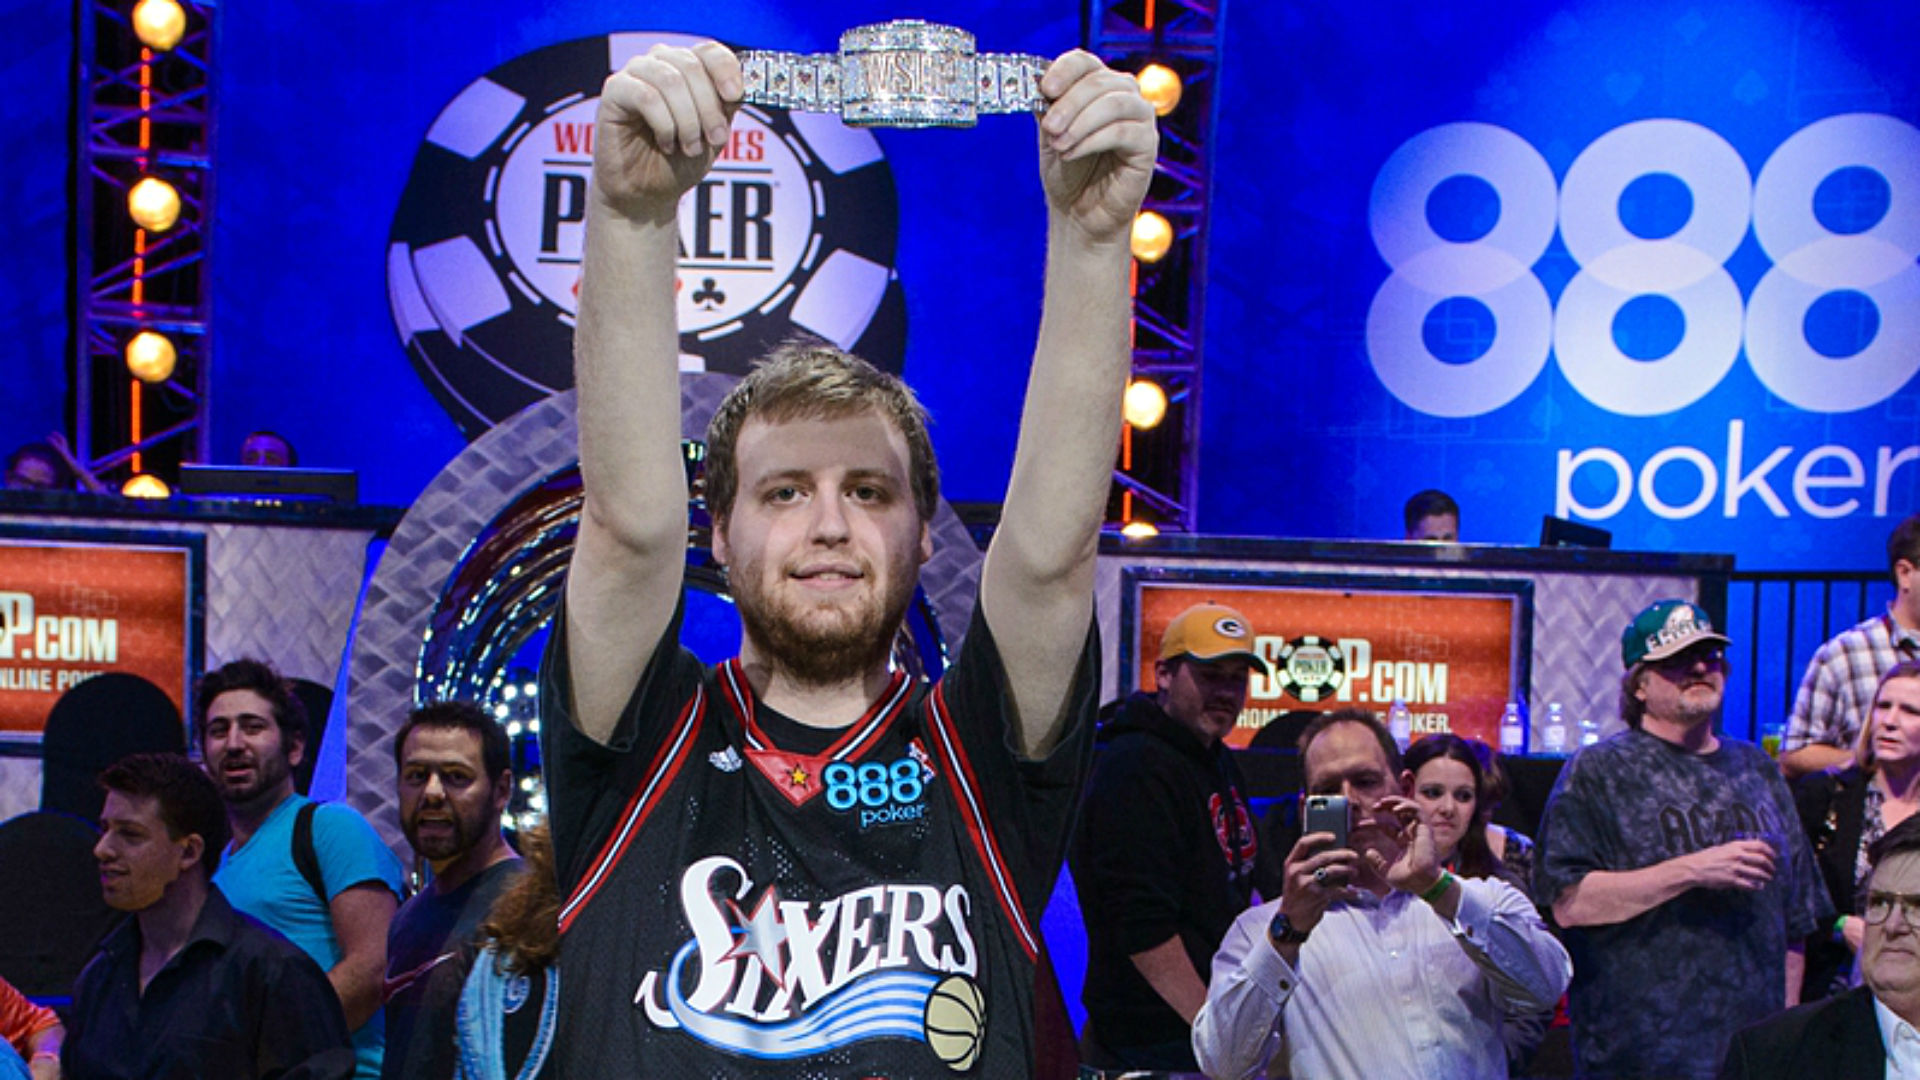 Is Joe McKeehen the Best Tournament Player Among Recent WSOP Main Event Champions? Our Data Analysis Says He Is